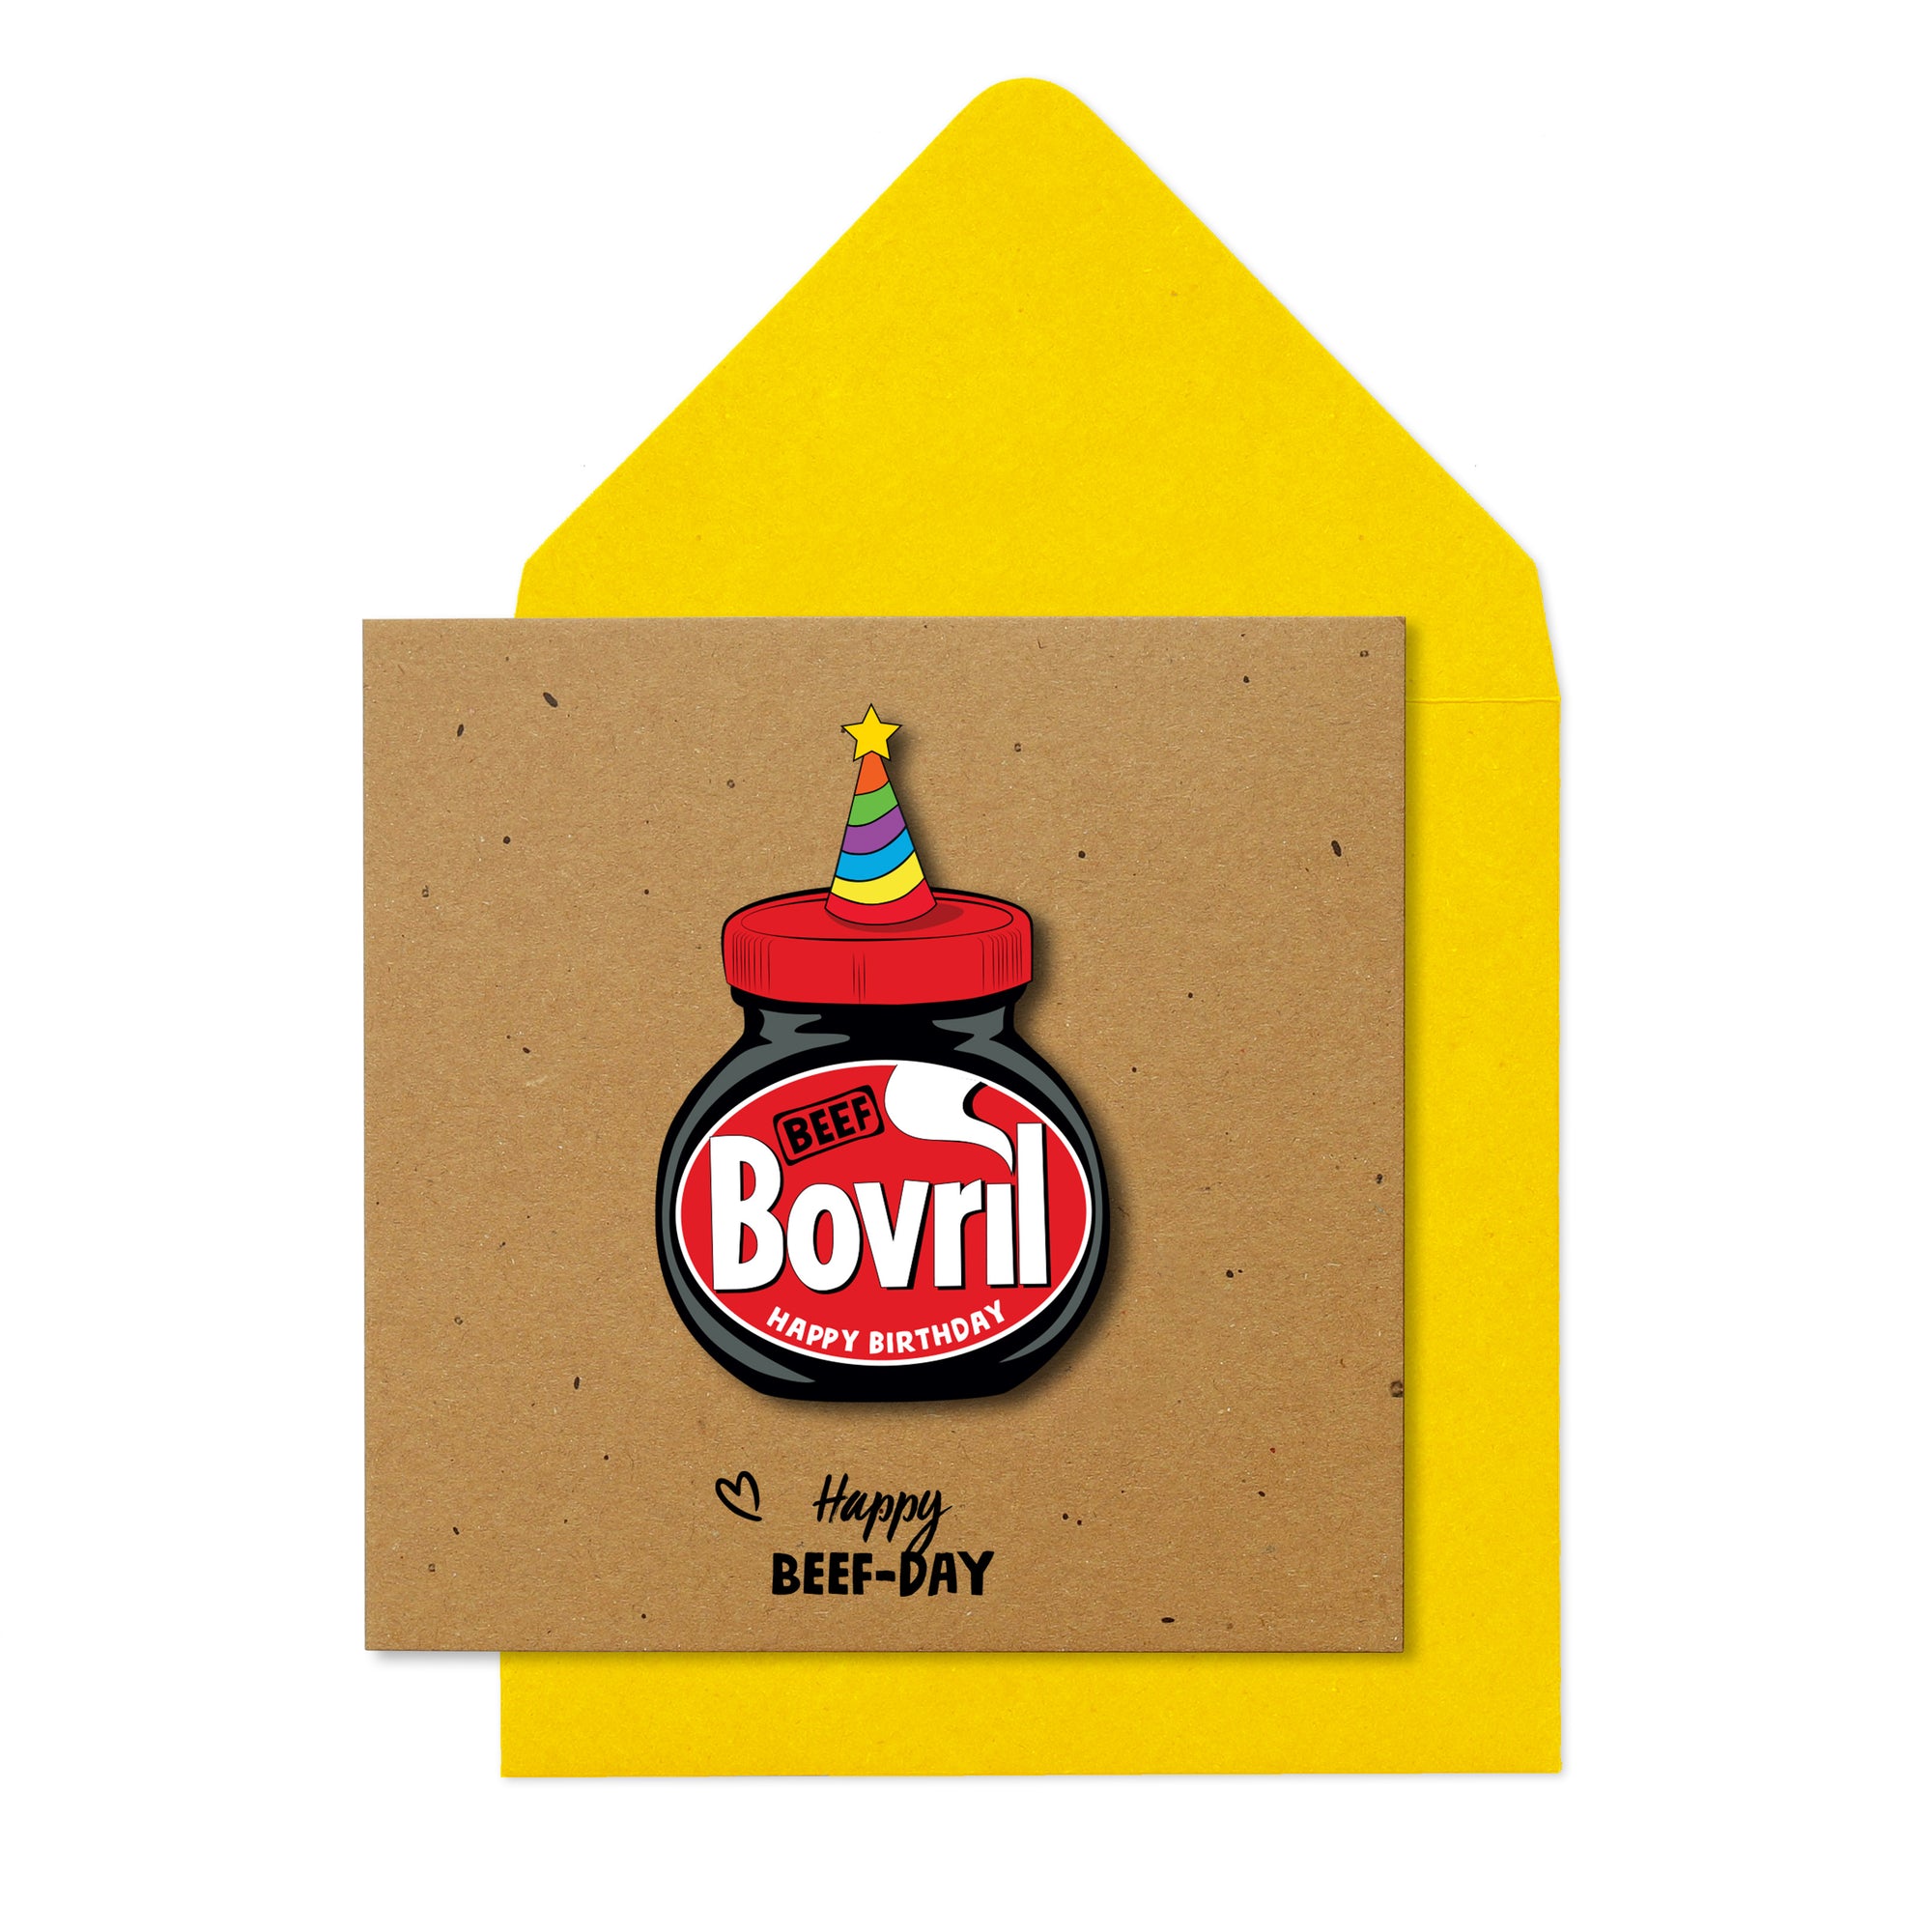 Happy Beef-day' Bovril Party Hat